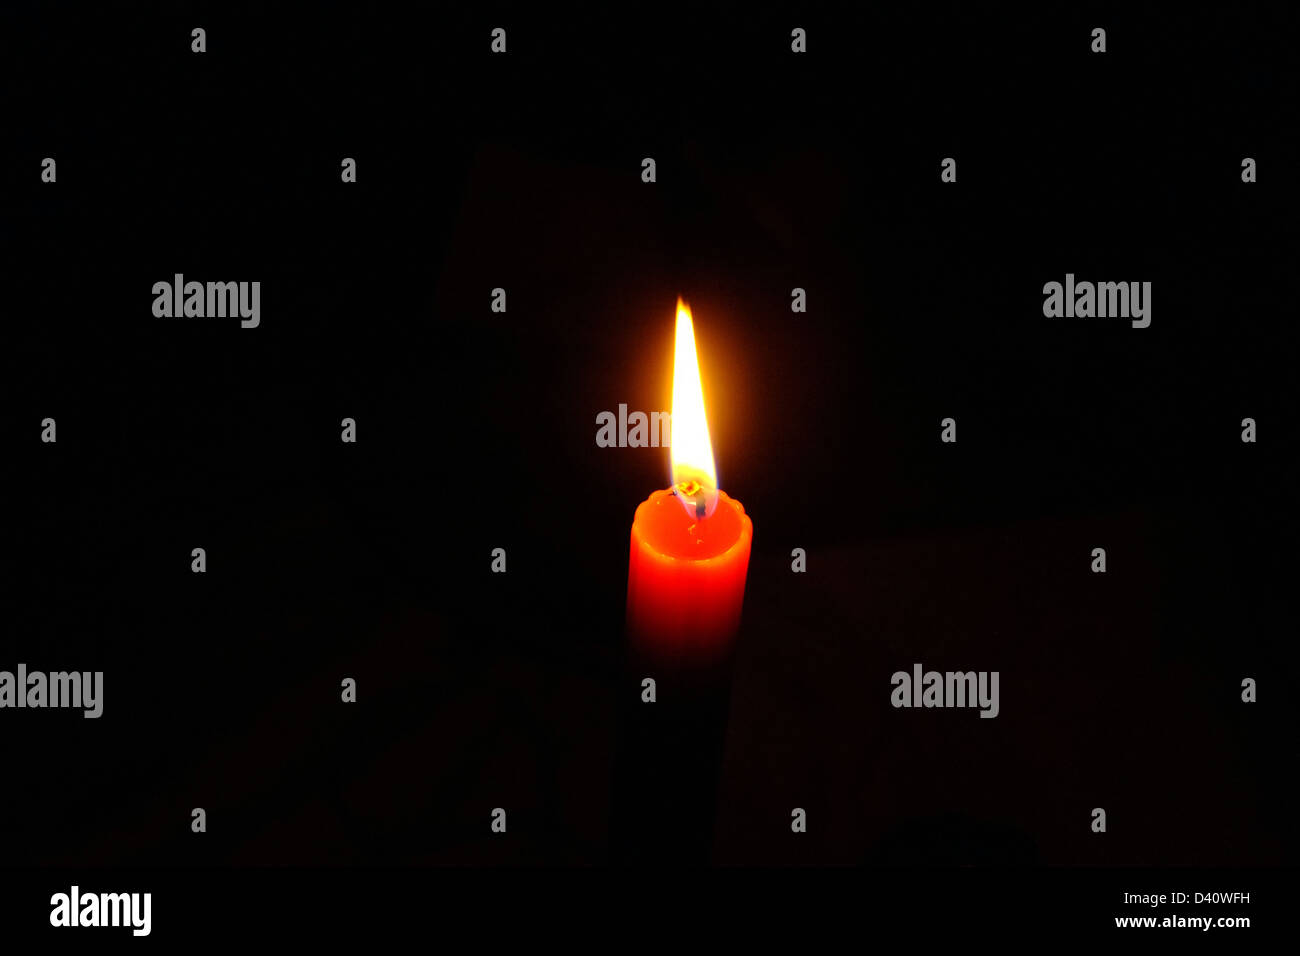 Man Holding Burning Match While Lighting Candles In Dark Kitchen During Power  Outage Stock Photo, Picture and Royalty Free Image. Image 194083174.